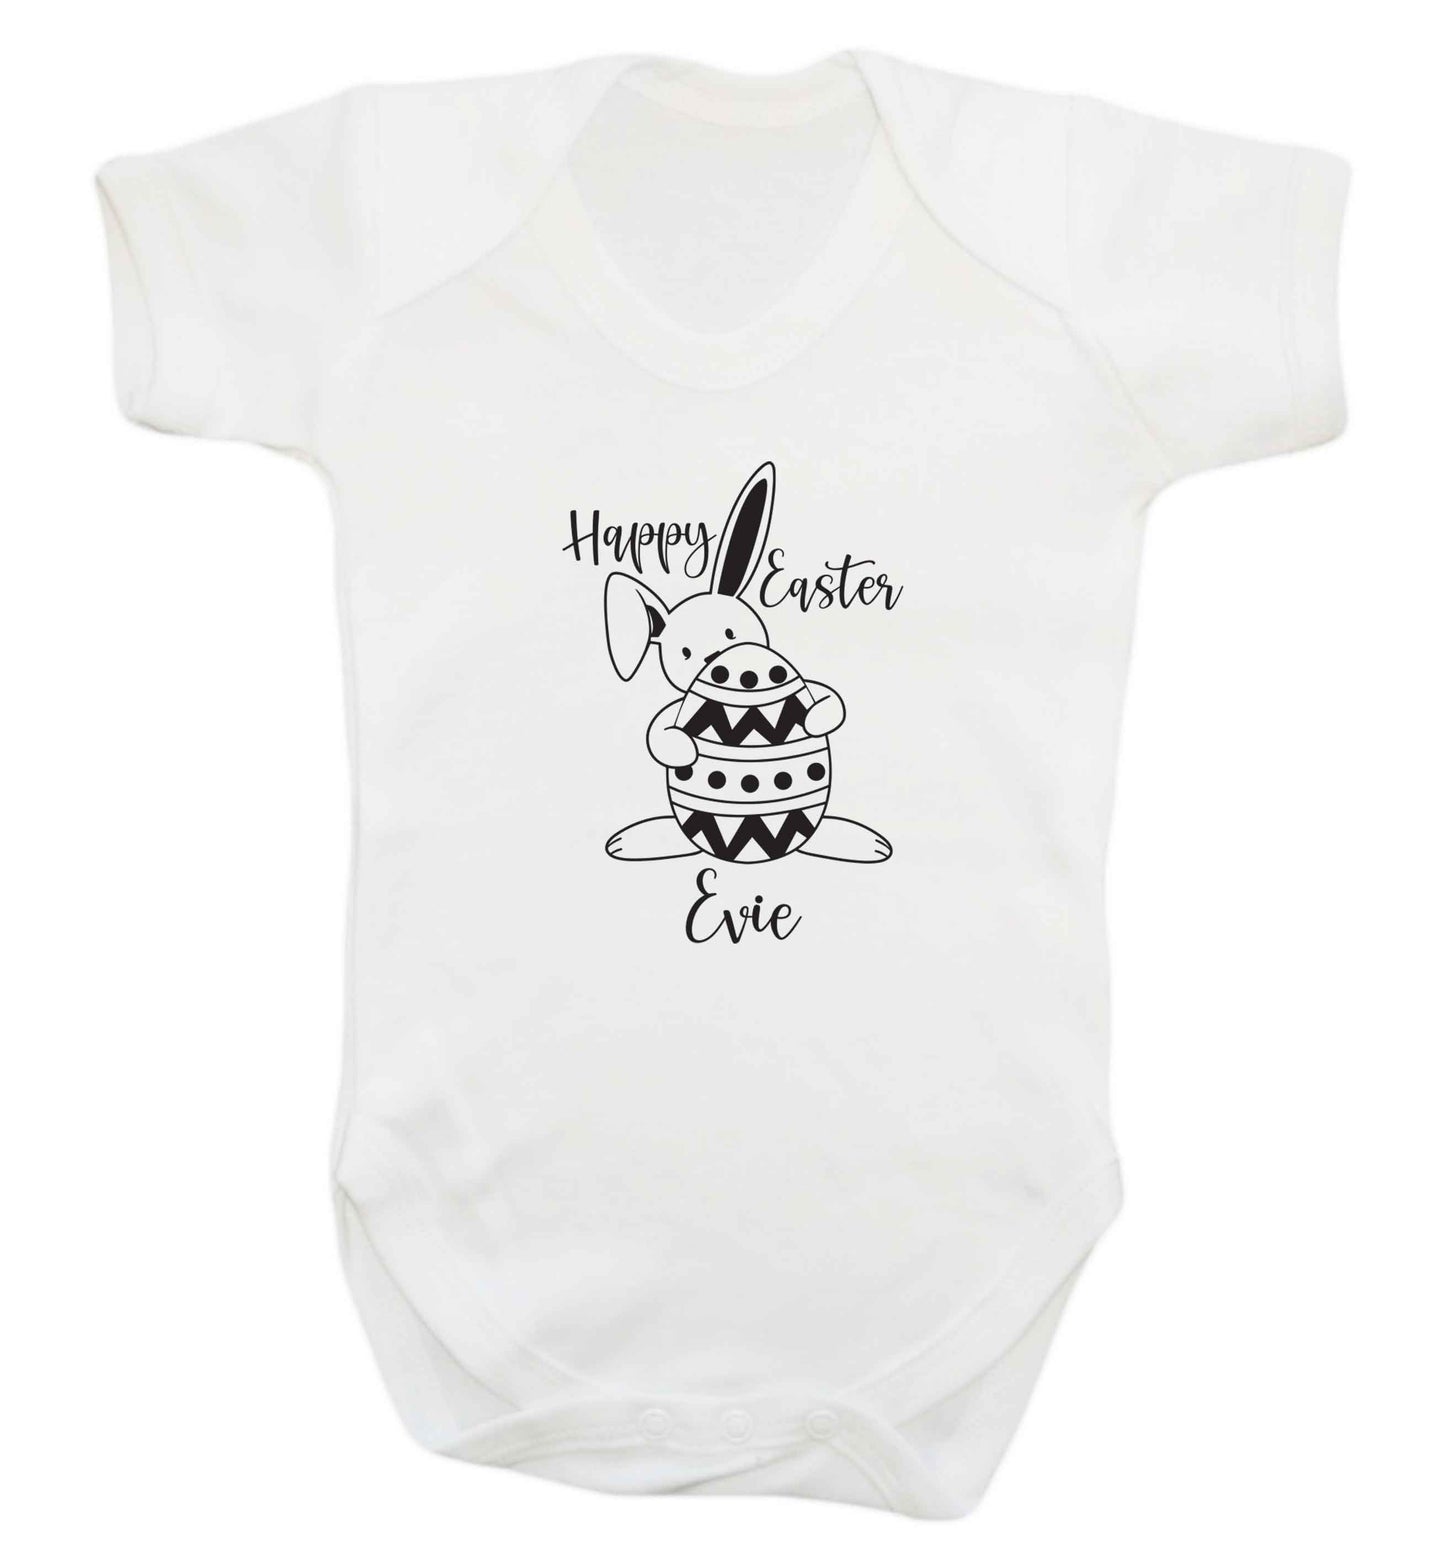 Happy Easter - personalised baby vest white 18-24 months